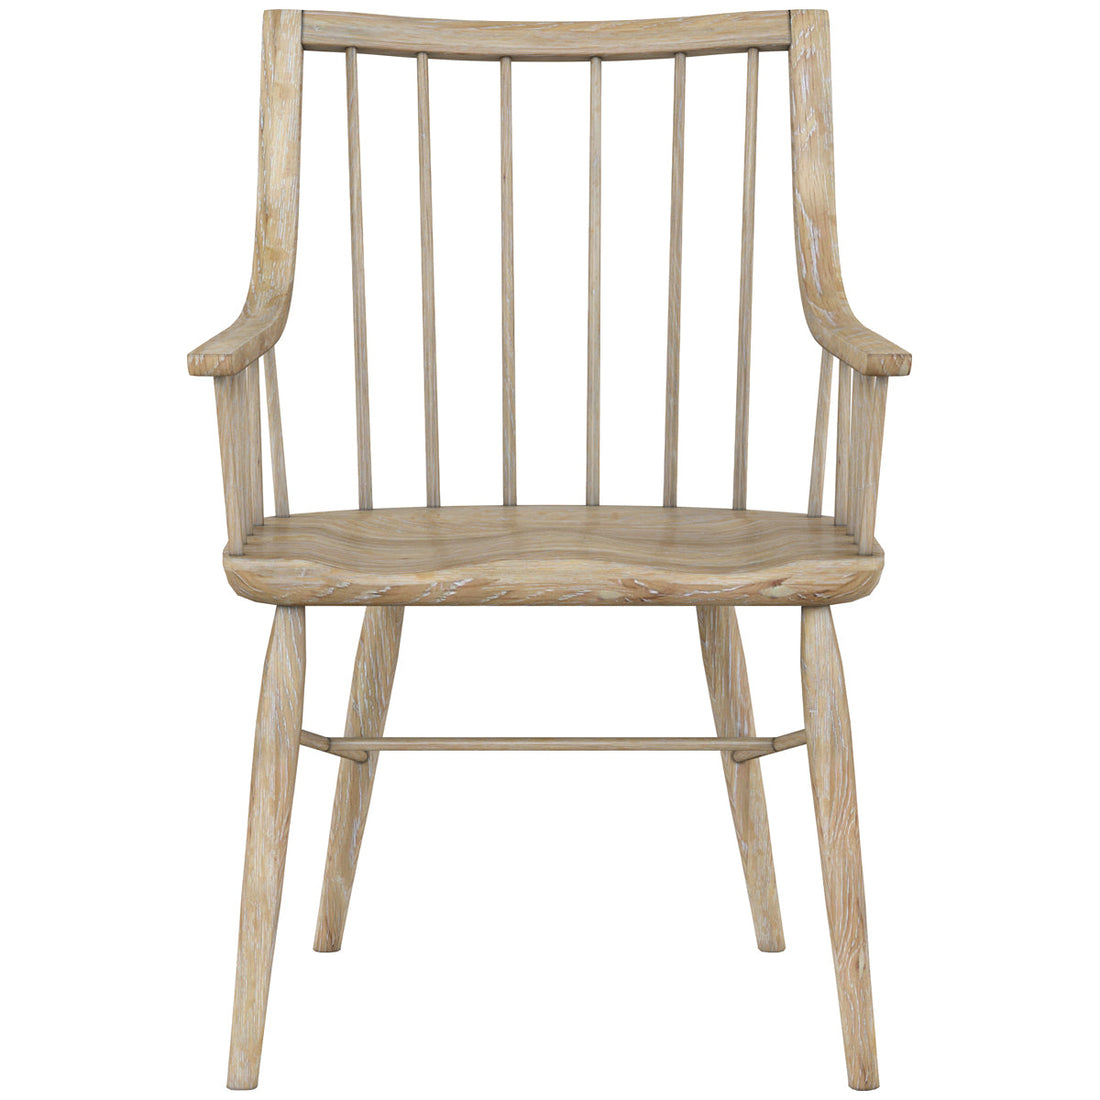 A.R.T. Furniture Frame Windsor Arm Chair, Set of 2